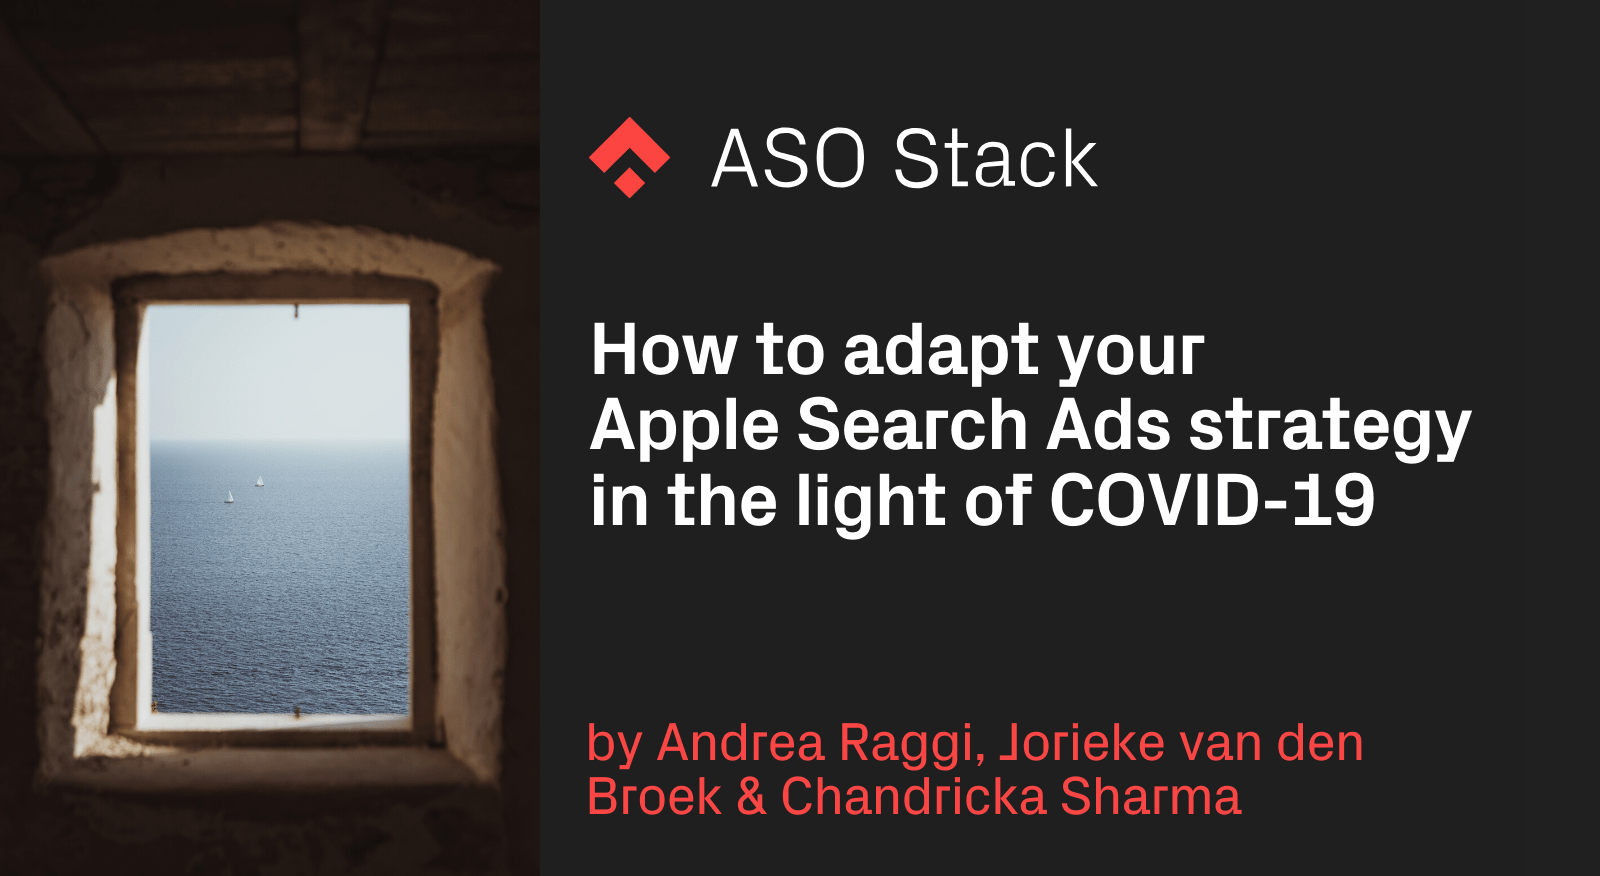 How to adapt your Apple Search Ads strategy in the light of COVID-19 